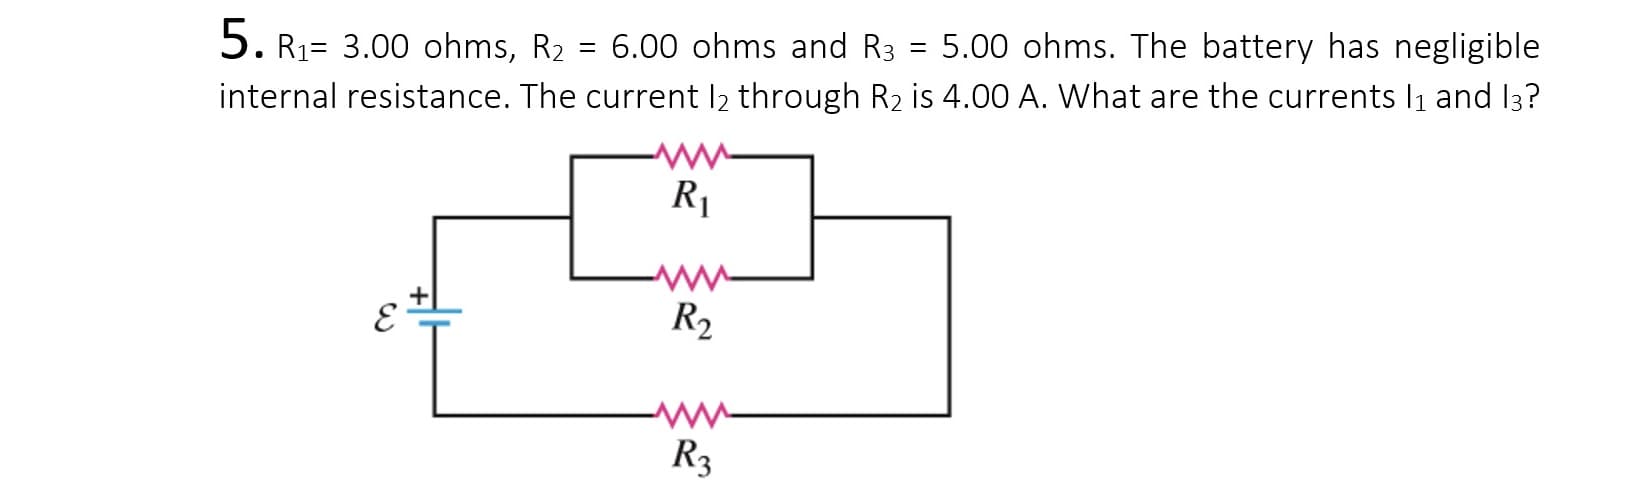 5. R1= 3.00 ohms, R2 = 6.00 ohms and R3
internal resistance. The current l2 through R2 is 4.00 A. What are the currents l1 and I3?
5.00 ohms. The battery has negligible
%3D
R1
R2
R3
